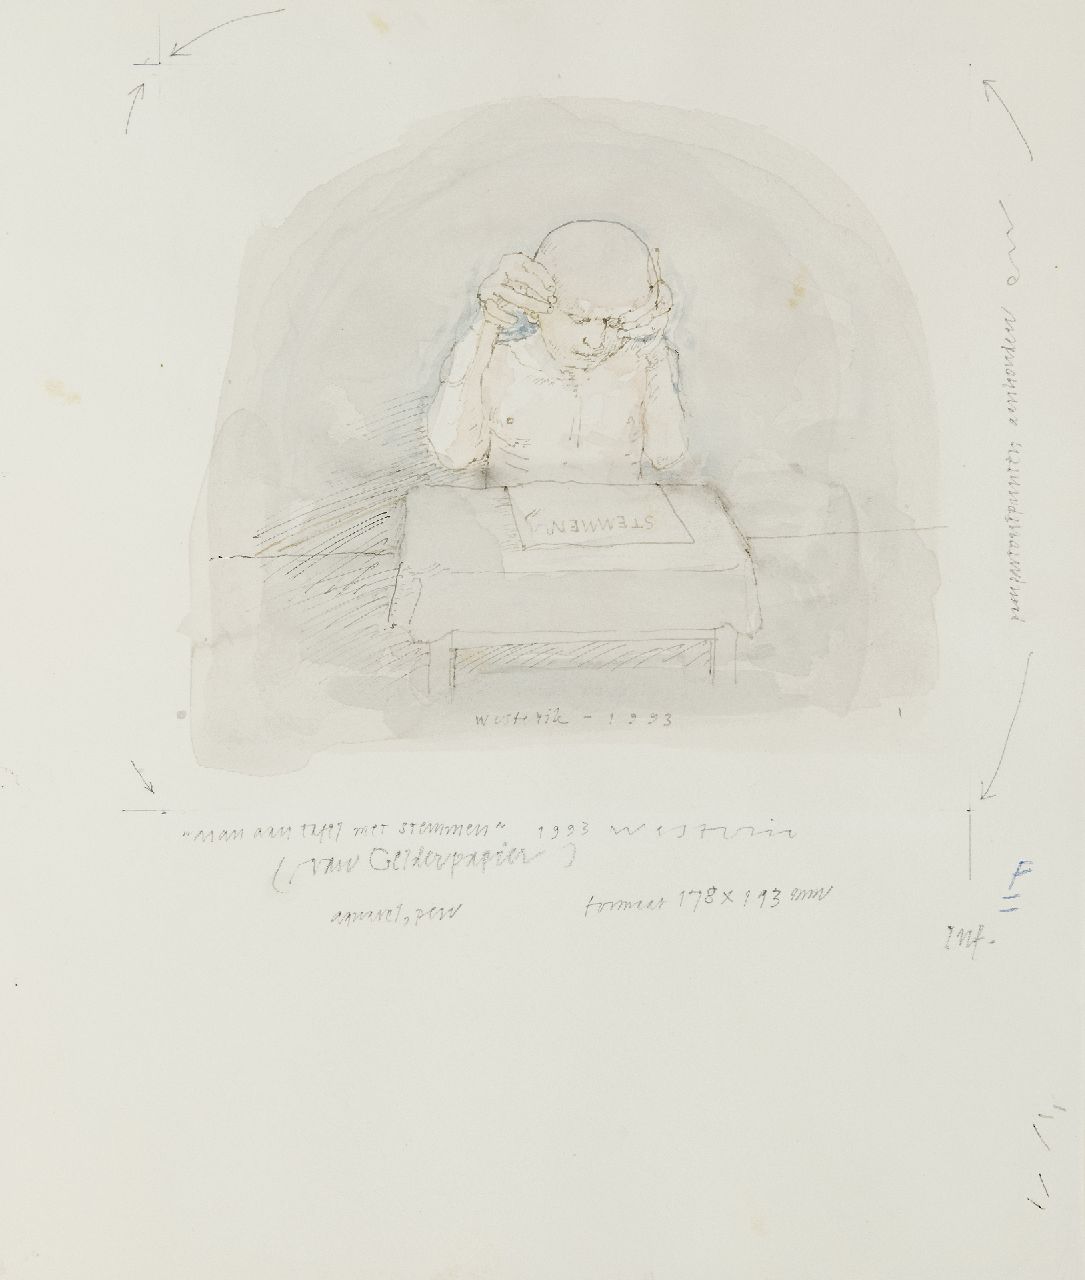 Westerik J.  | Jacobus 'Co' Westerik | Watercolours and drawings offered for sale | Man at table with voices, pencil, ink and watercolour on paper 32.5 x 26.5 cm, signed l.c. and dated 1993